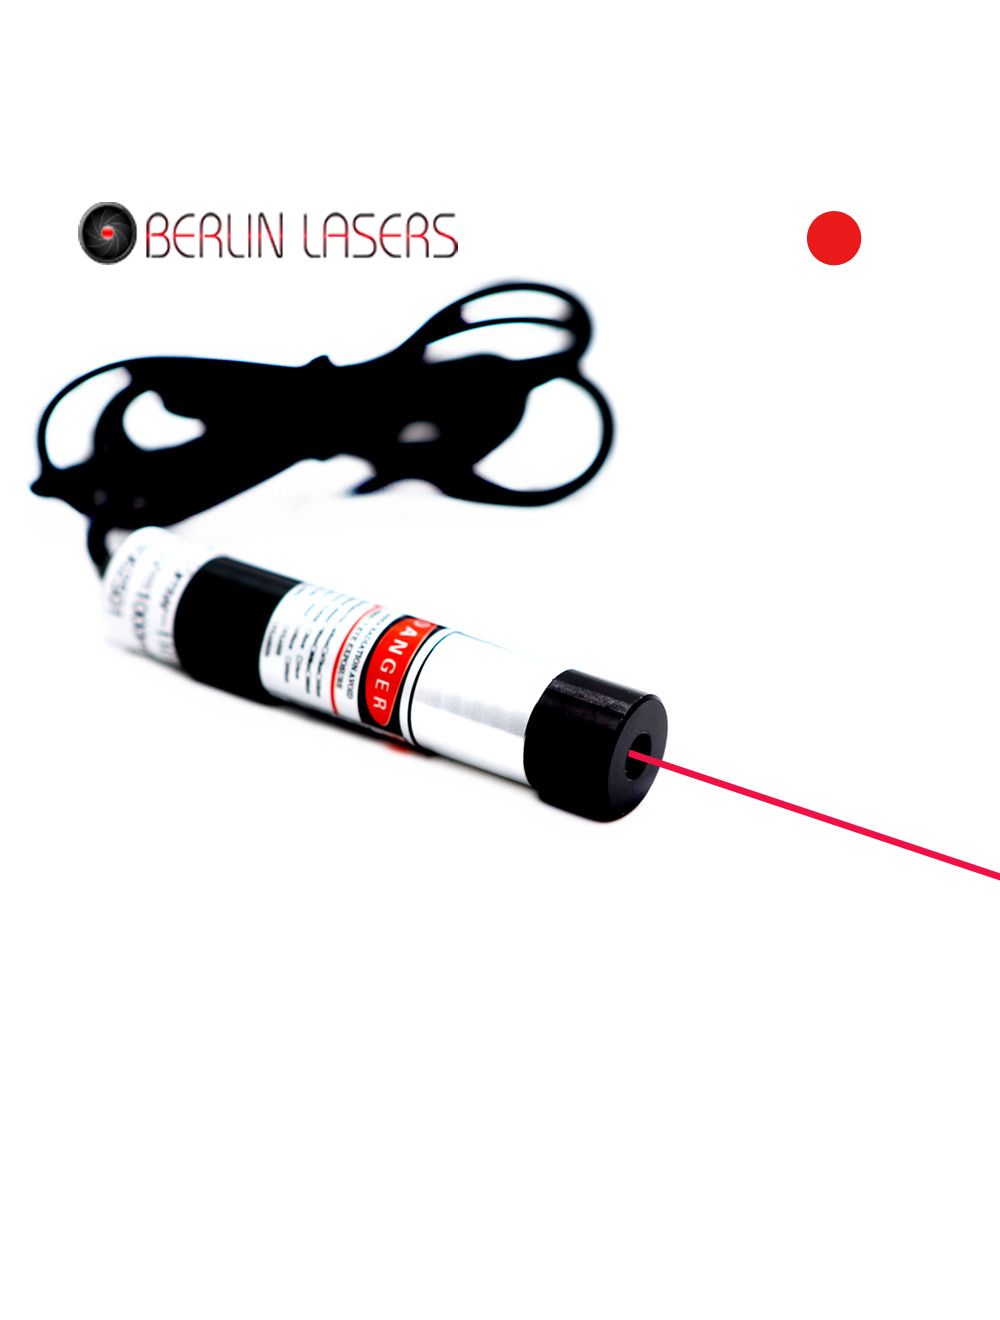 Red Dot Emitting Adjustable Focus Lens 685nm 5mW 10mW 20mW 30mW 80mW 100mW Red Laser Diode Modules | Berlinlasers